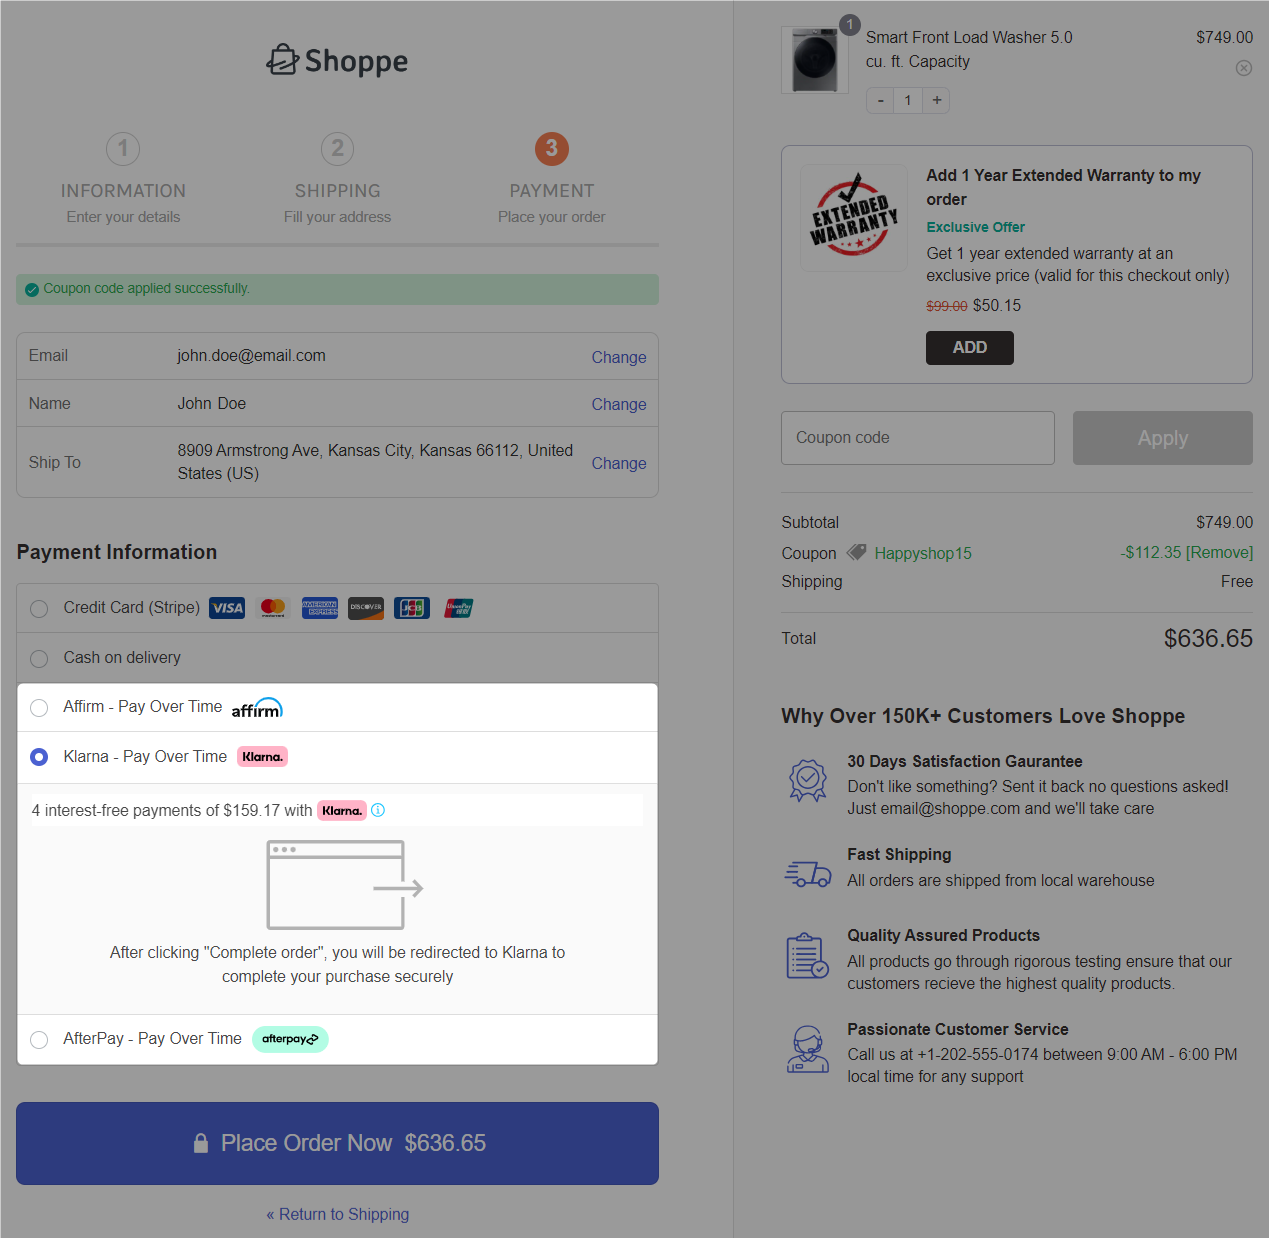 Head to the checkout page and you'll see all the BNPL payment options displaying there